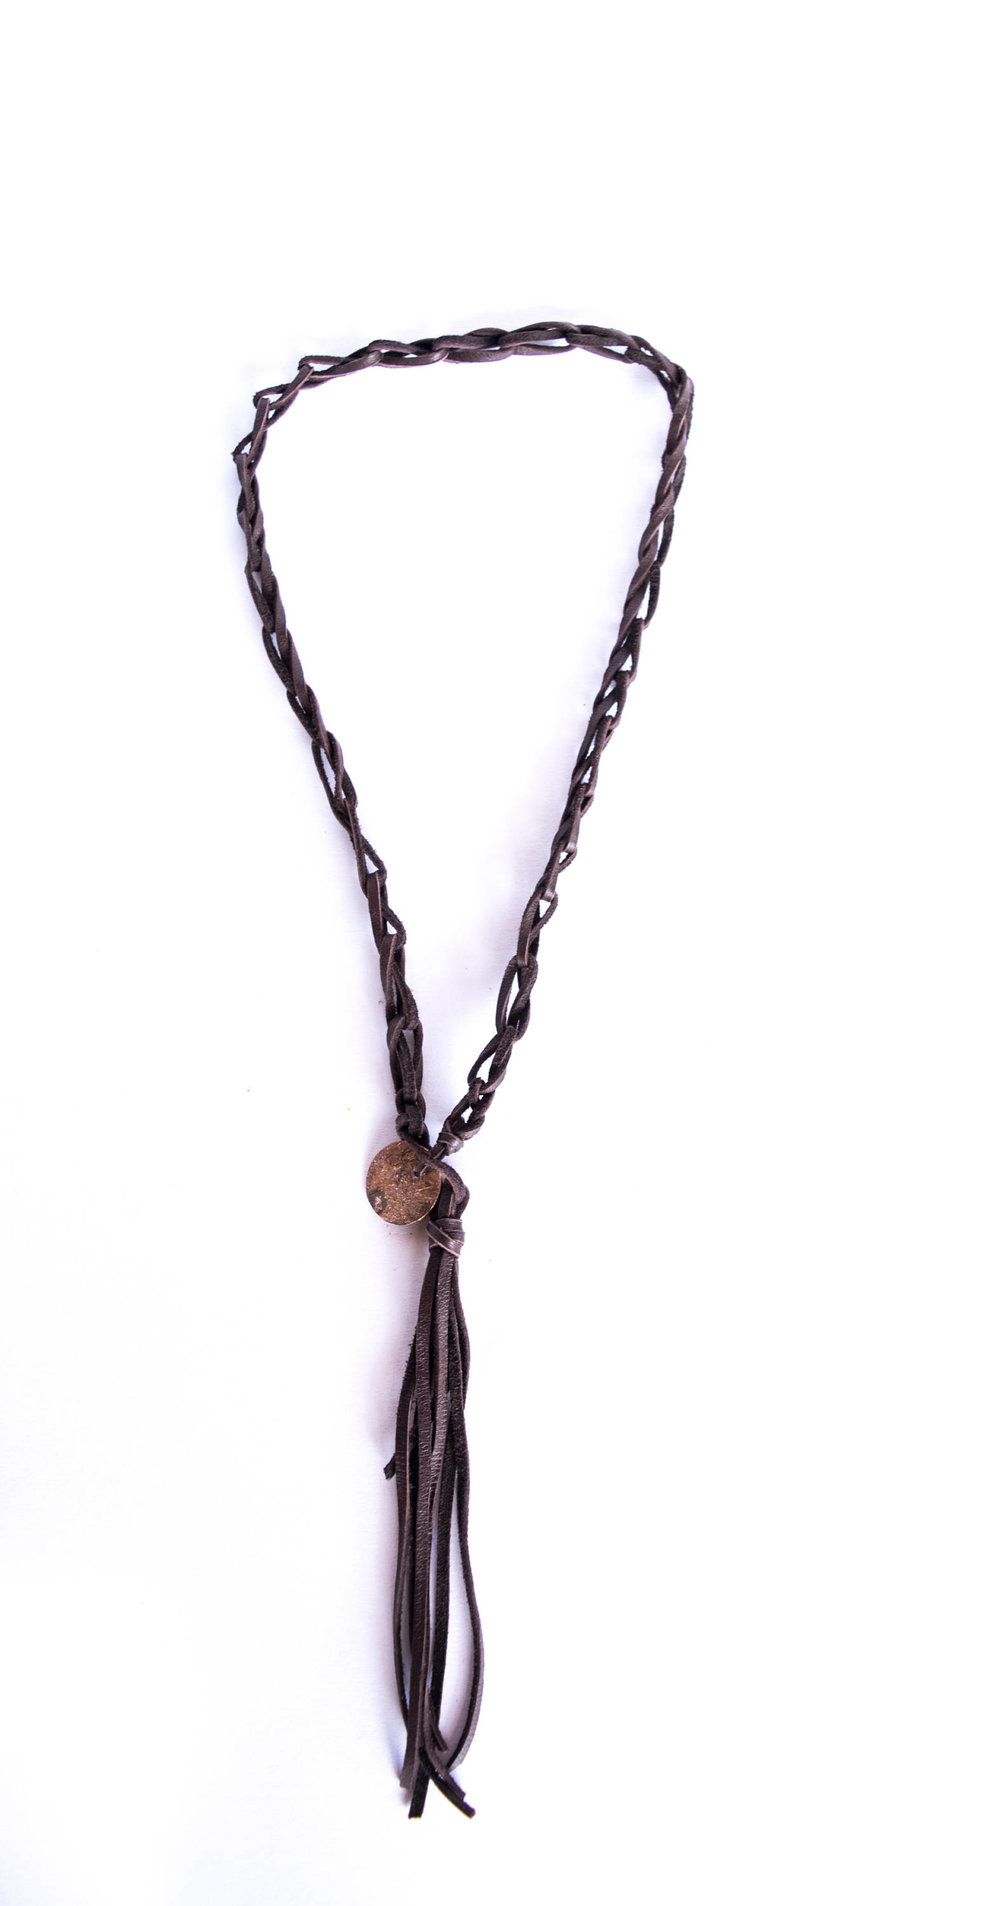 Chocolate and copper Braided Leather Necklace, Leather tassel